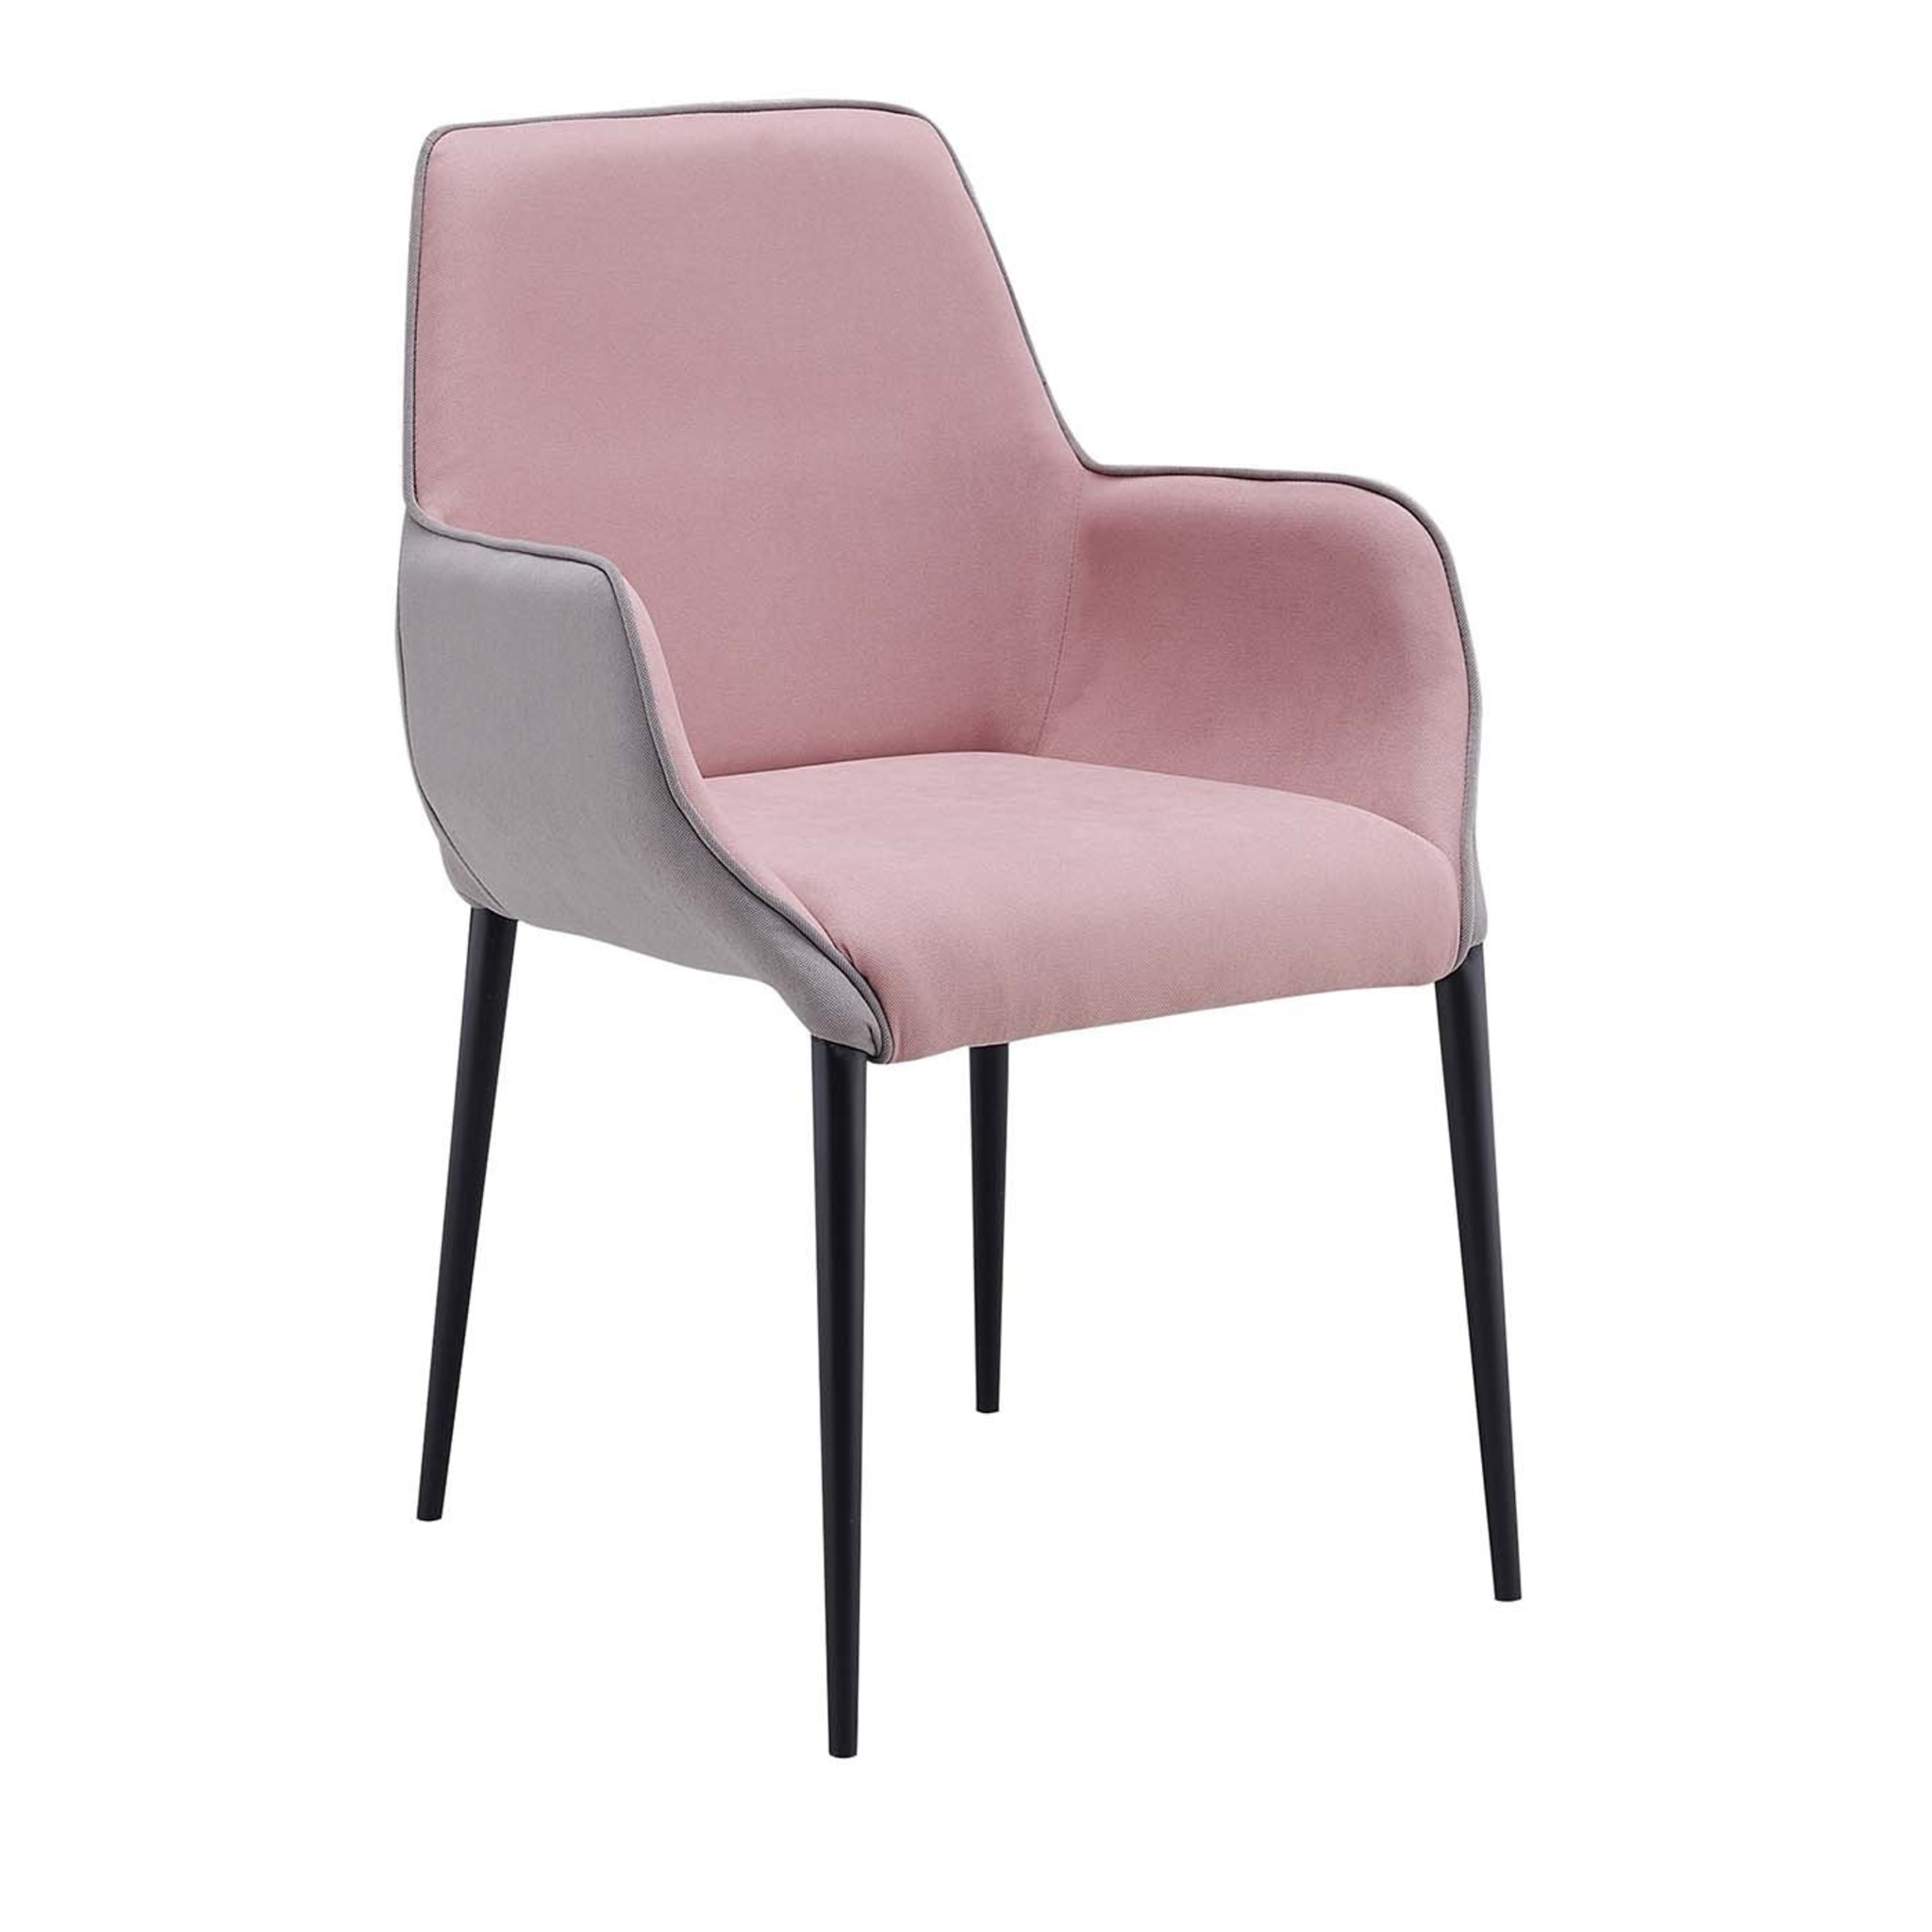 Melody PM Chair Pink and Gray - Main view